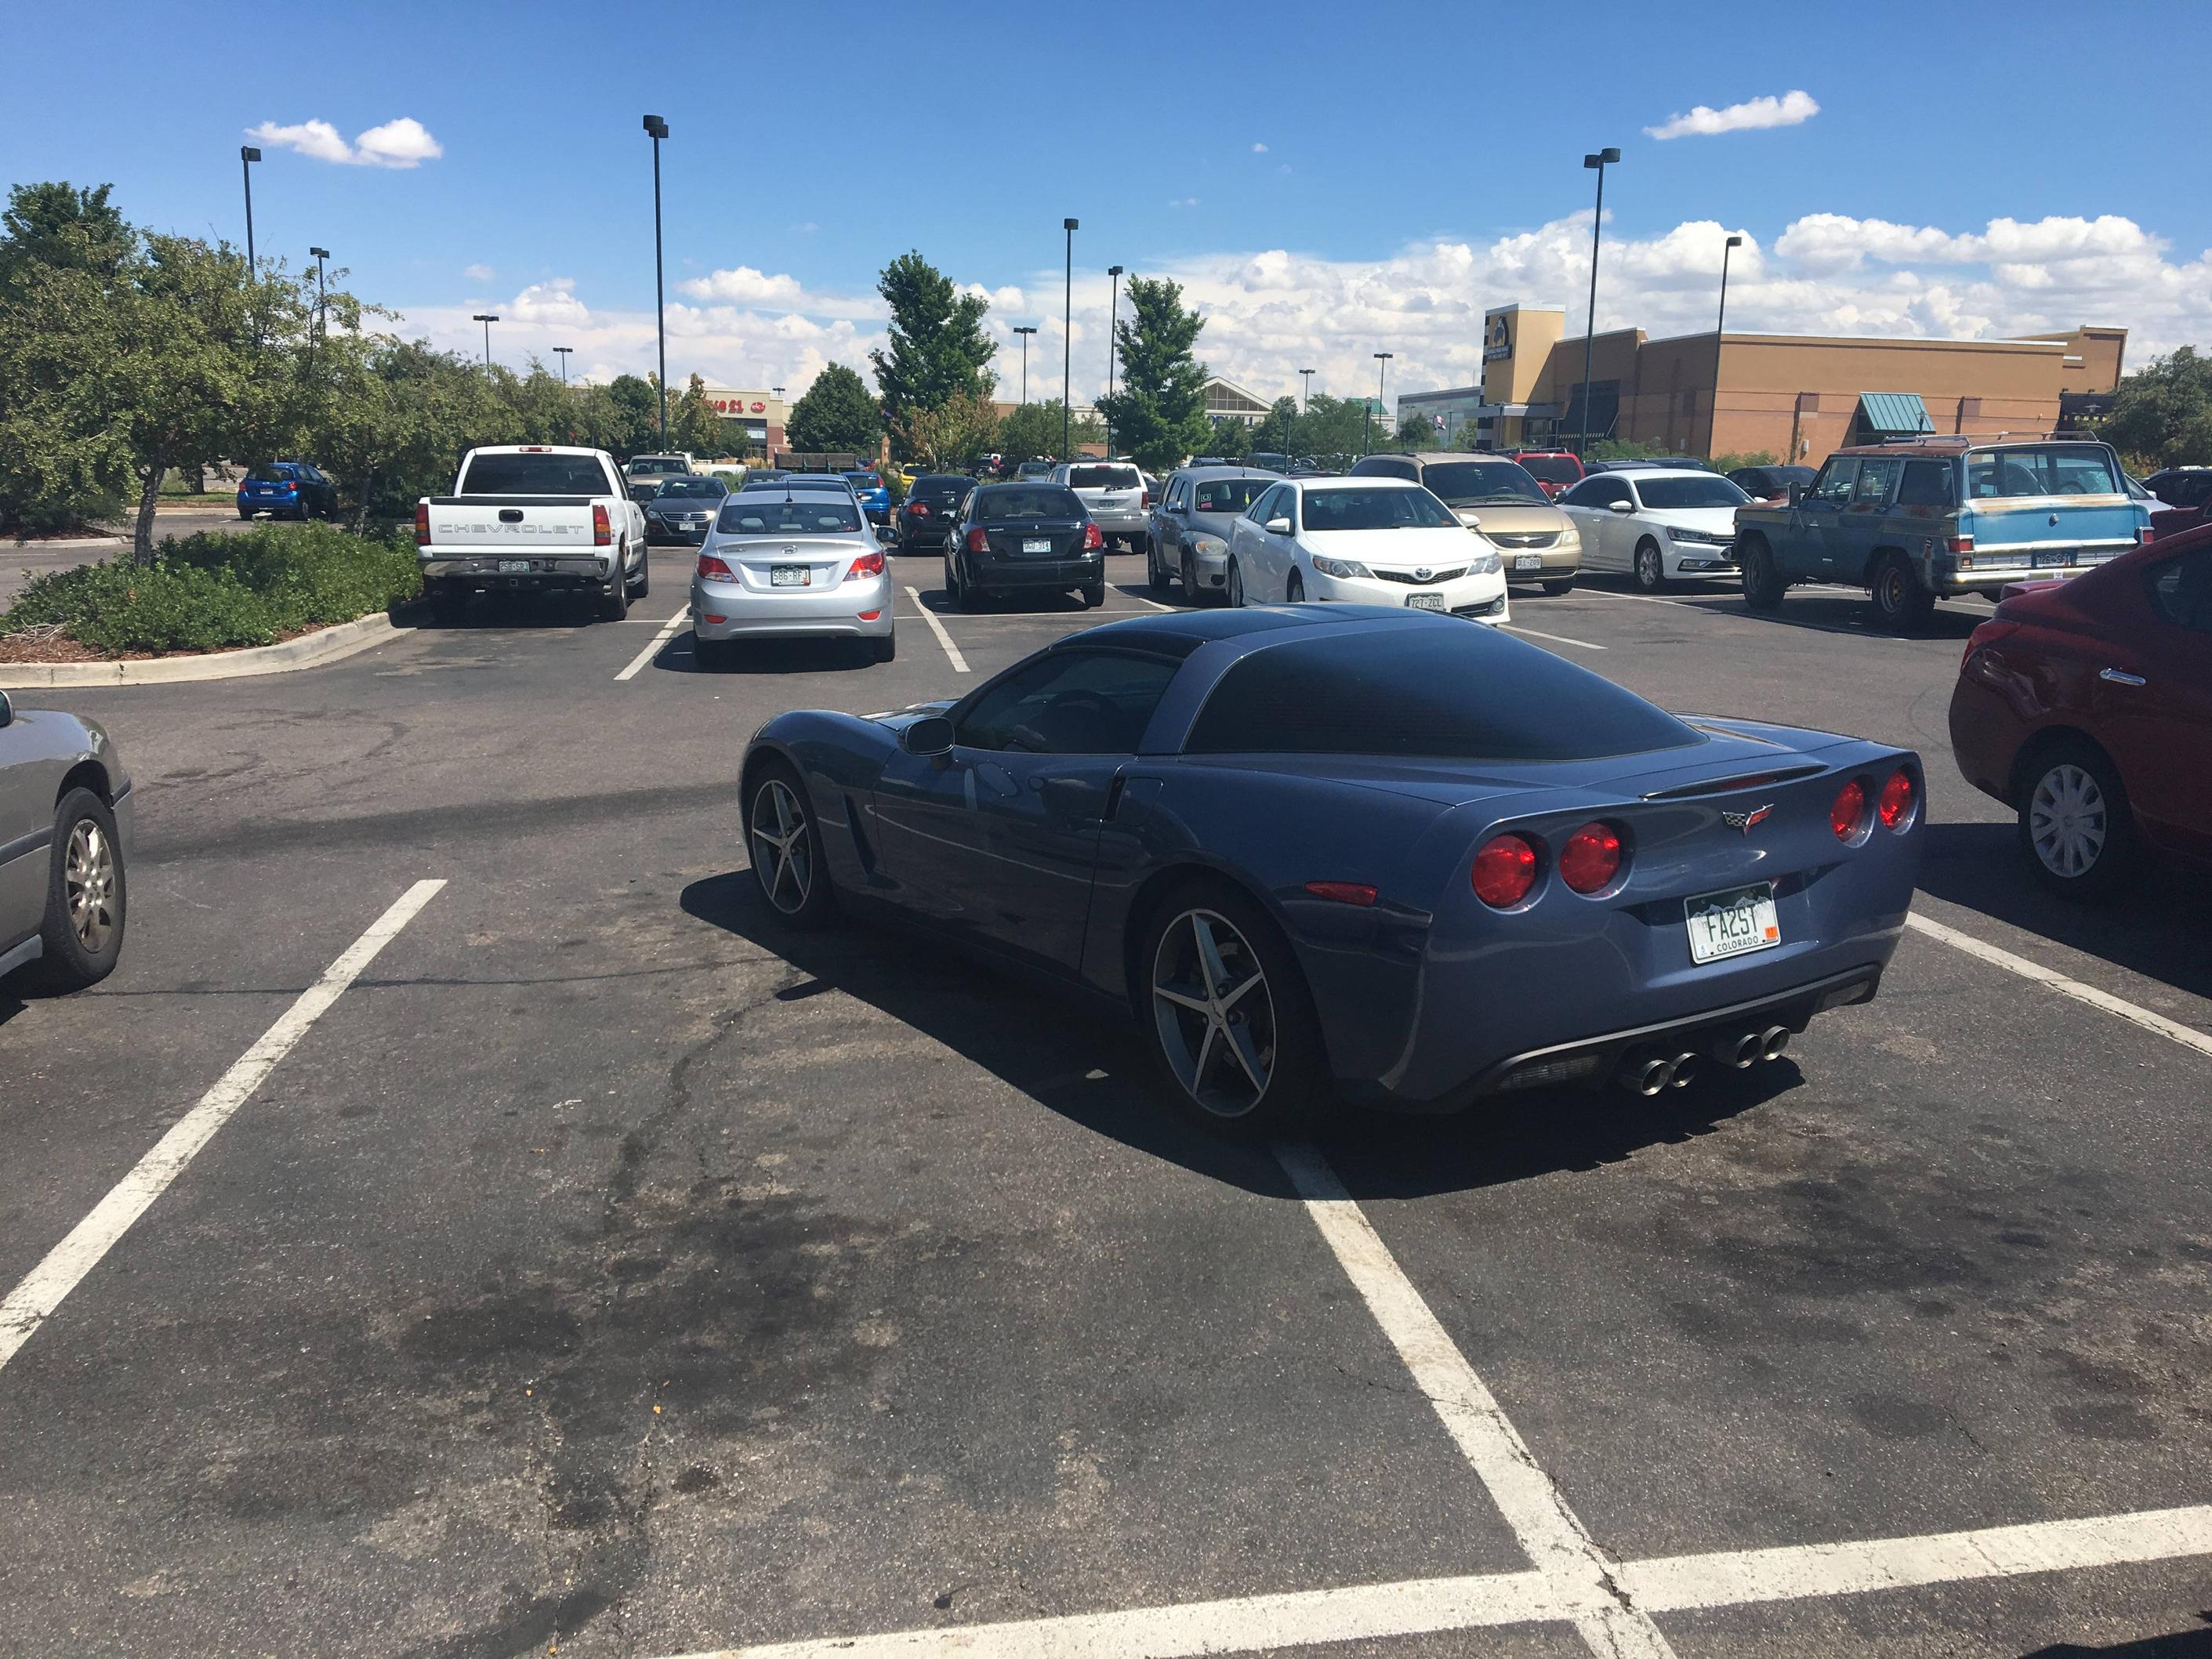 Corvette parked in a way that he is taking up 2 spots